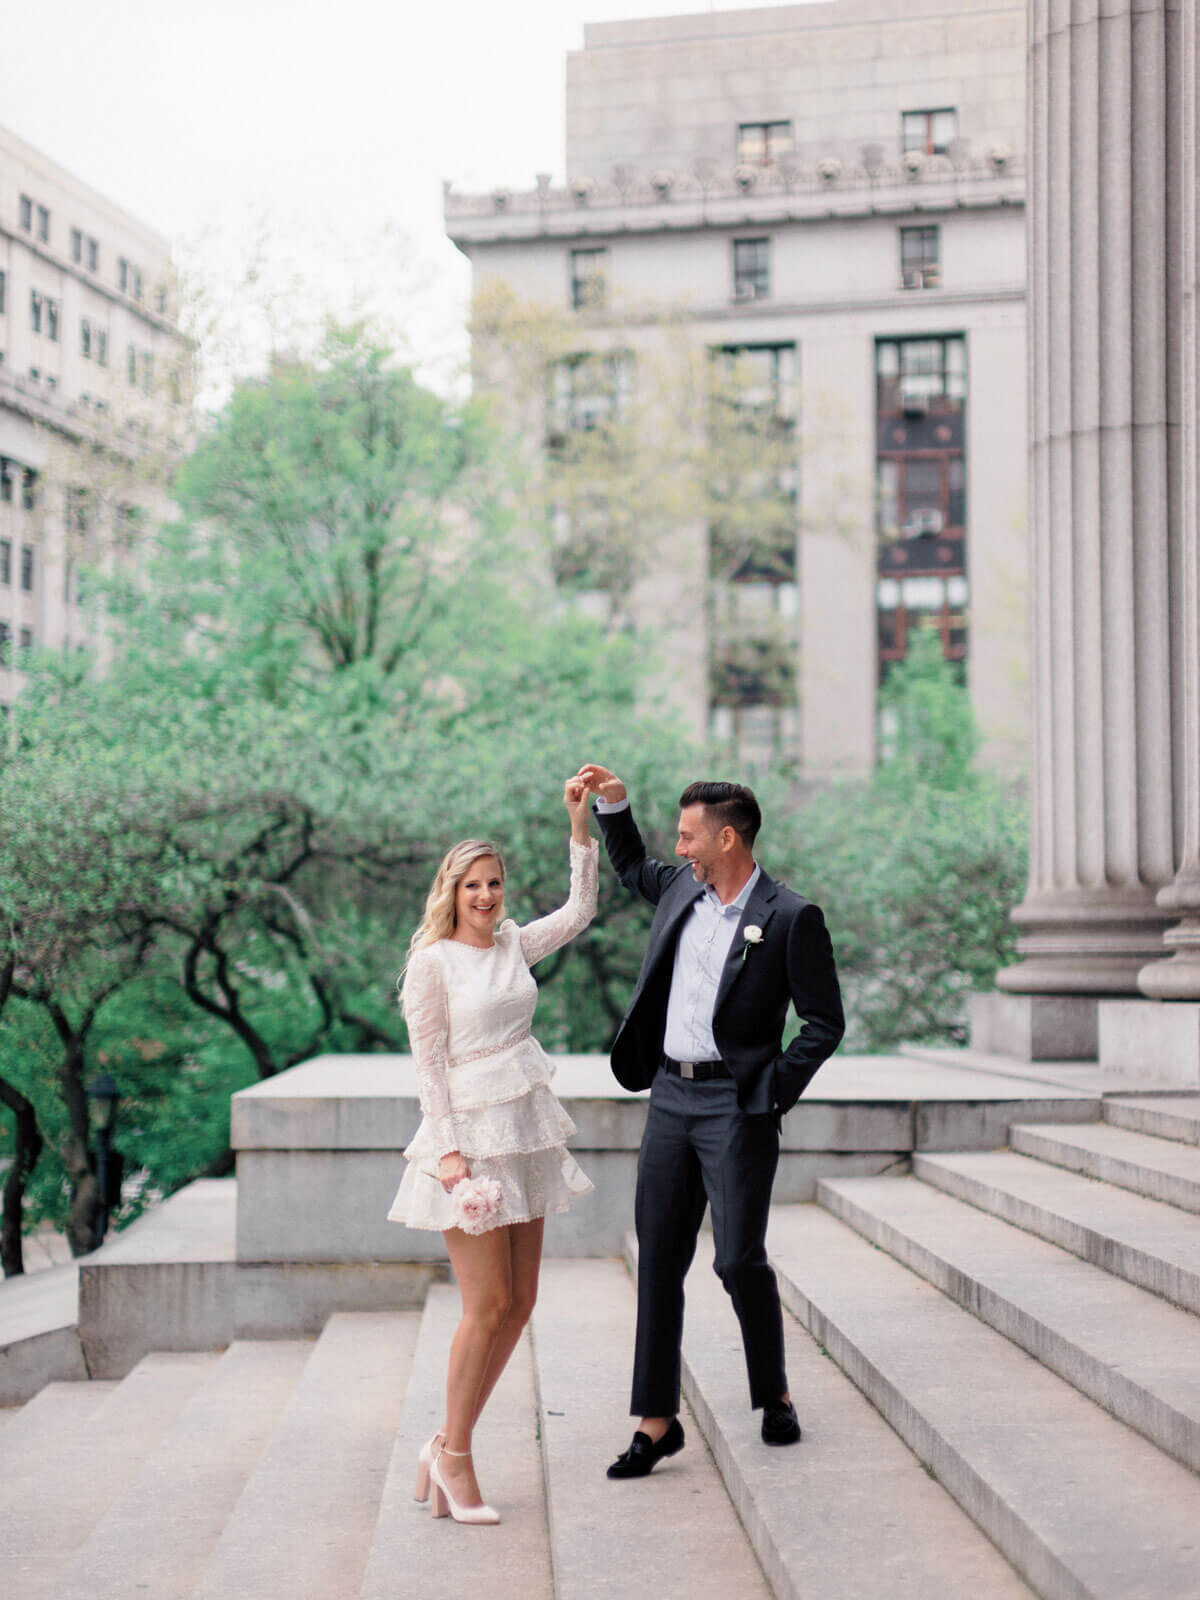 The eloping bride and groom are happily holding hands up in the air on the grand staircase of the NY City Hall. Image by Jenny Fu Studio